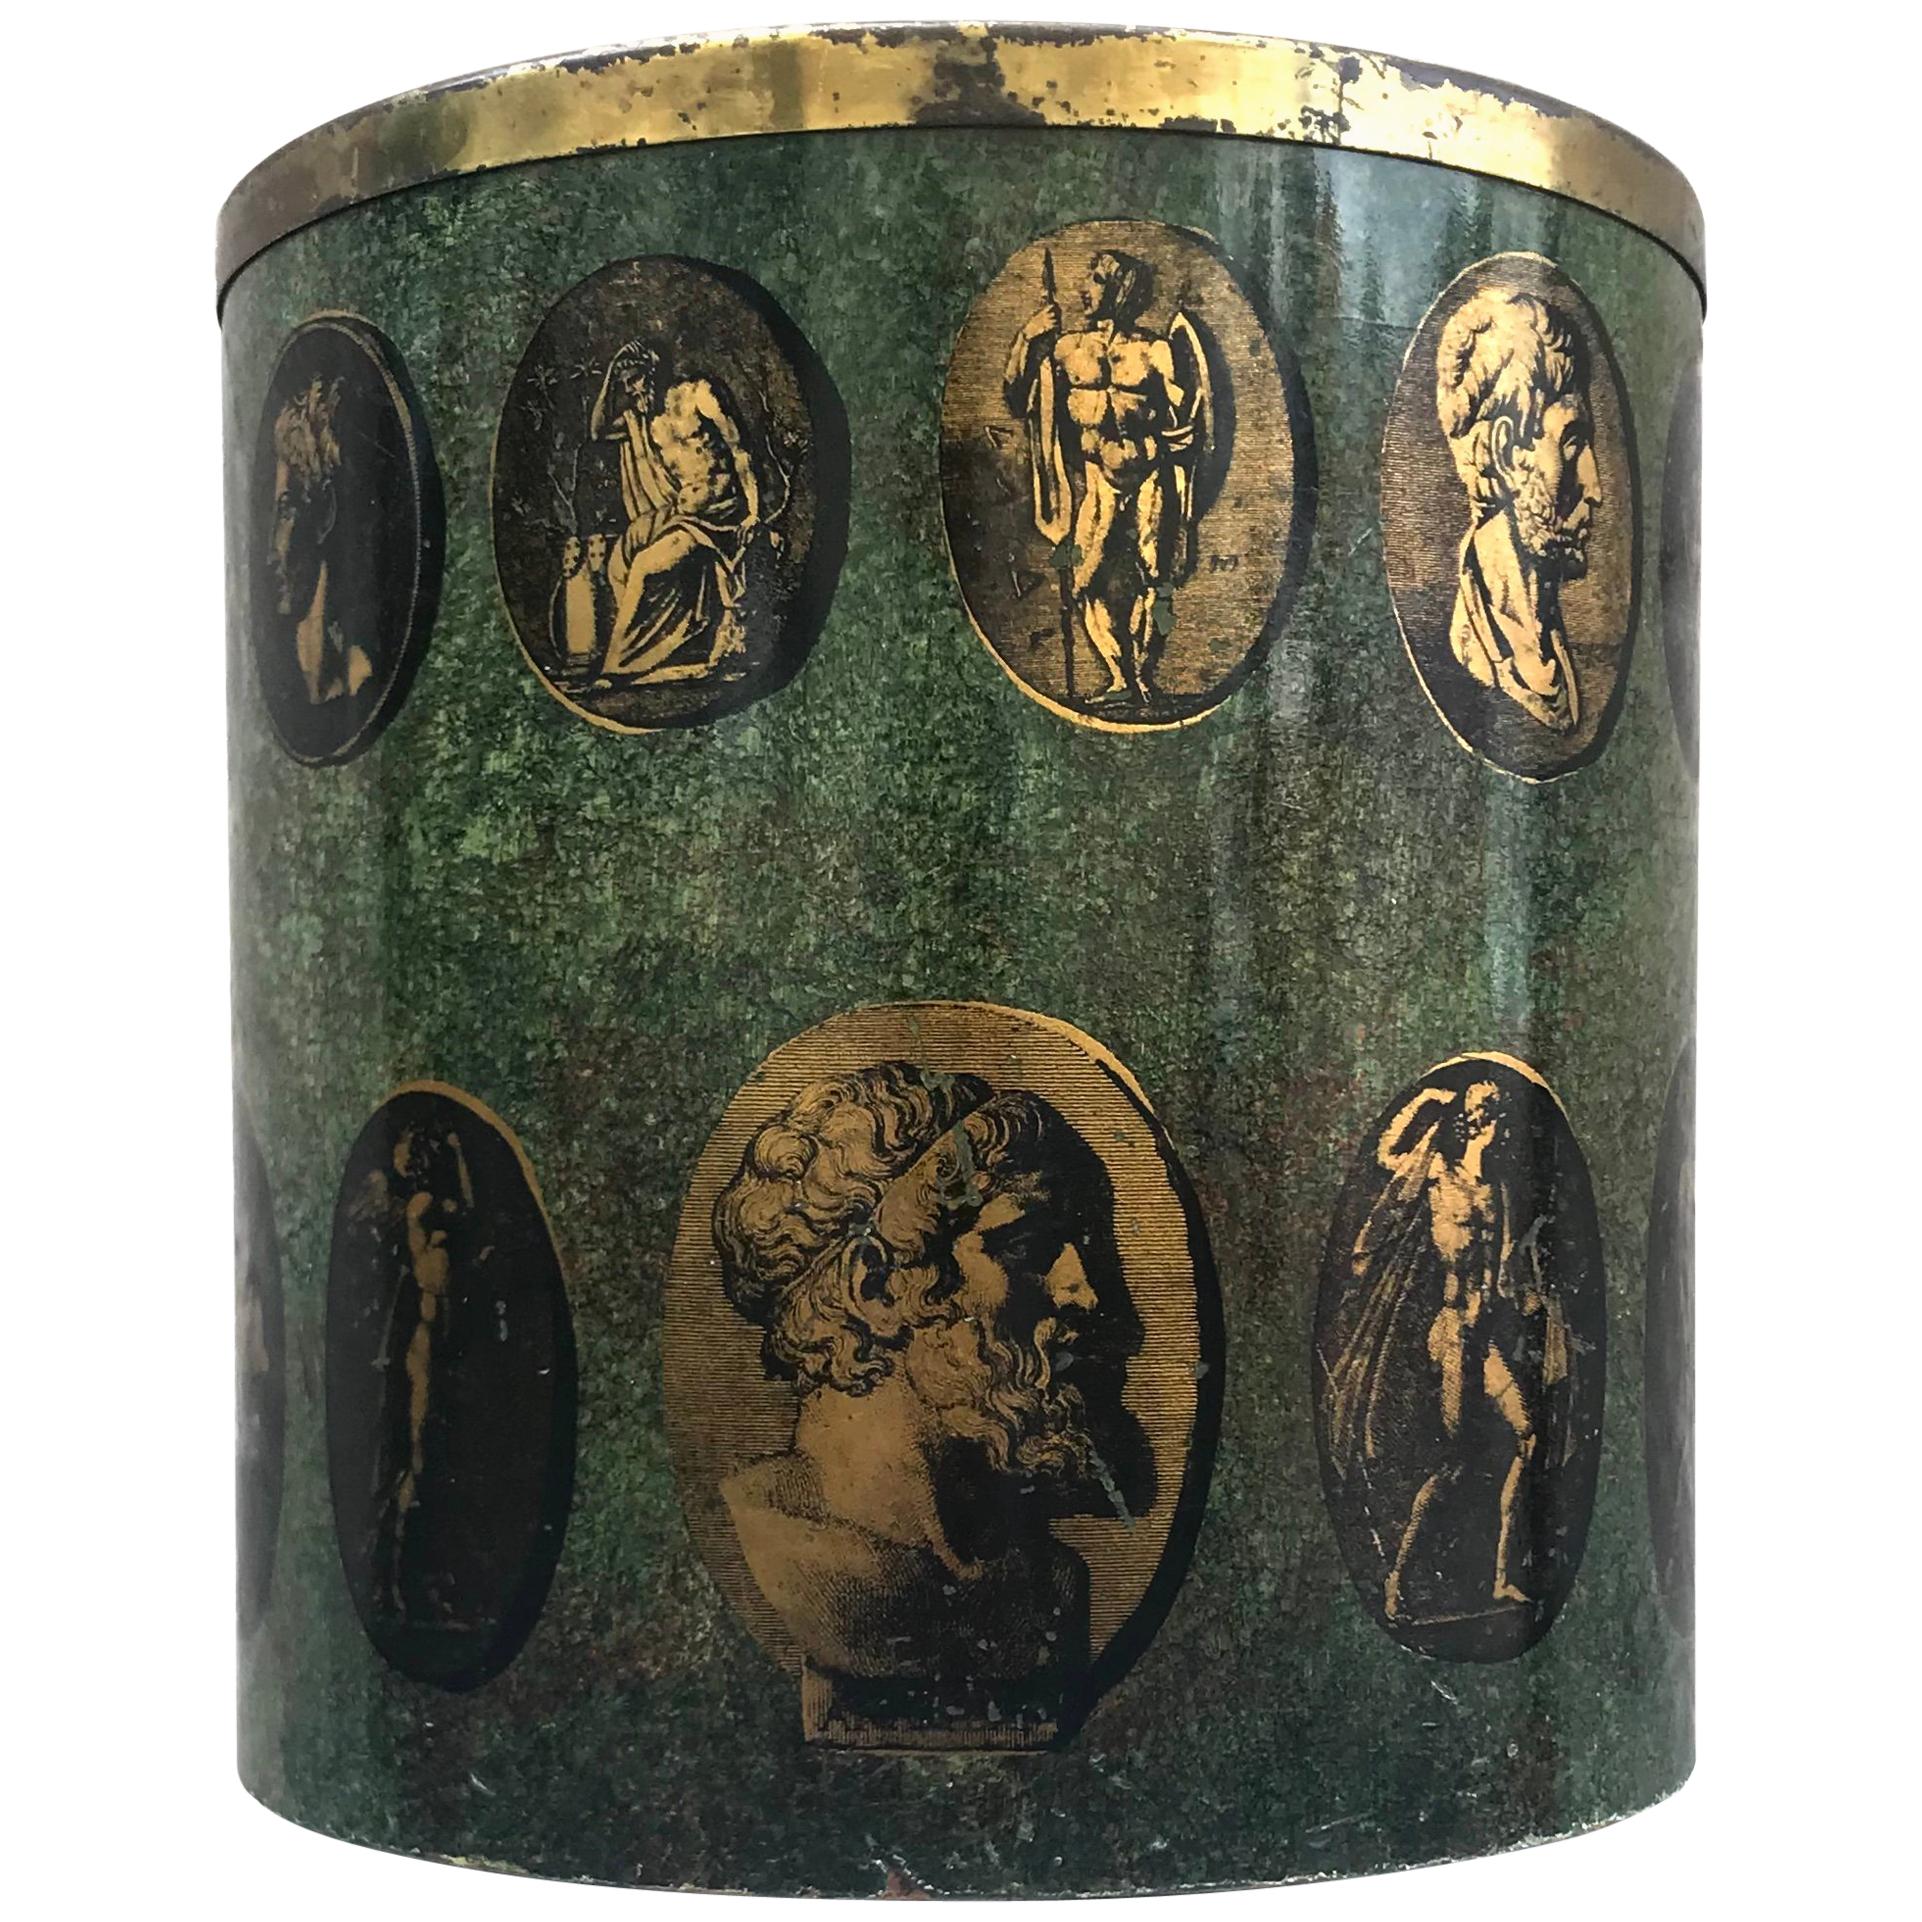 Early Rare 1950s Fornasetti Wastebasket